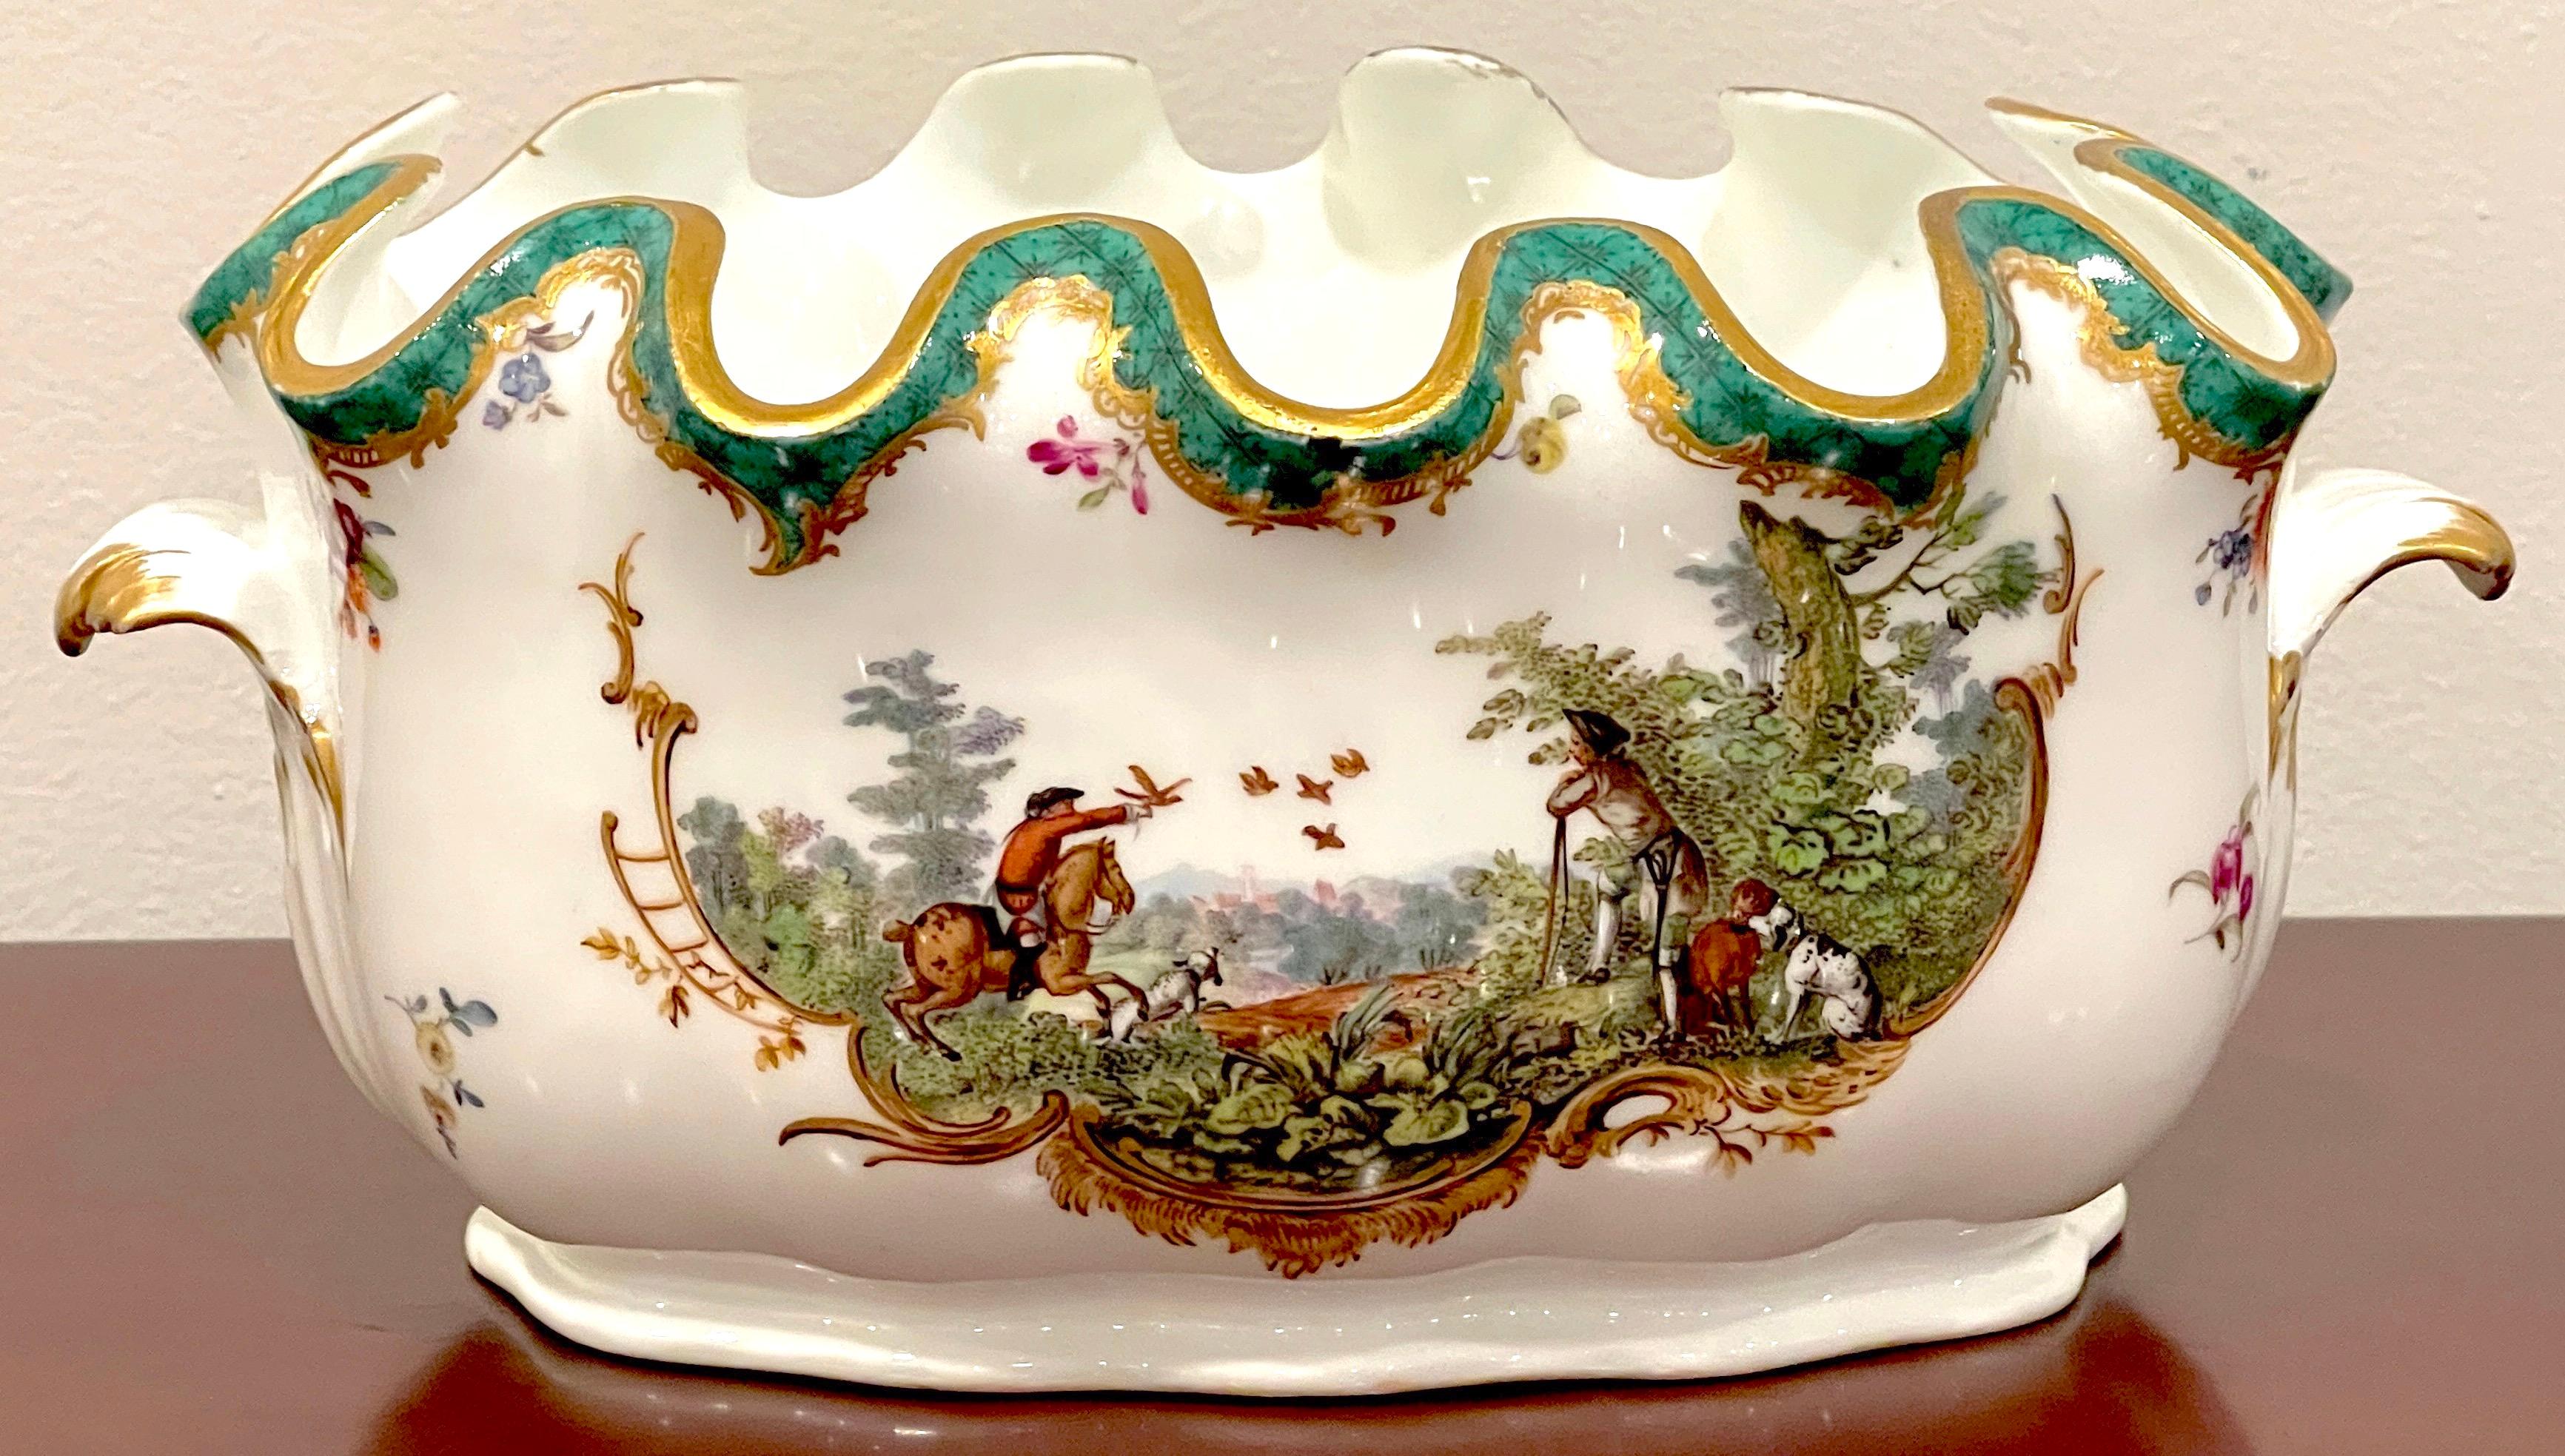 Meissen Marcolini Period (1774-1814 ) Monteith Bowl, Equestrian Hunt Motif 
Germany, 1774-1814 Meissen Marcolini Period

A stunning example, a rare form in 18th century Meissen Porcelain, this two handled oval monteith bowl with scalloped green